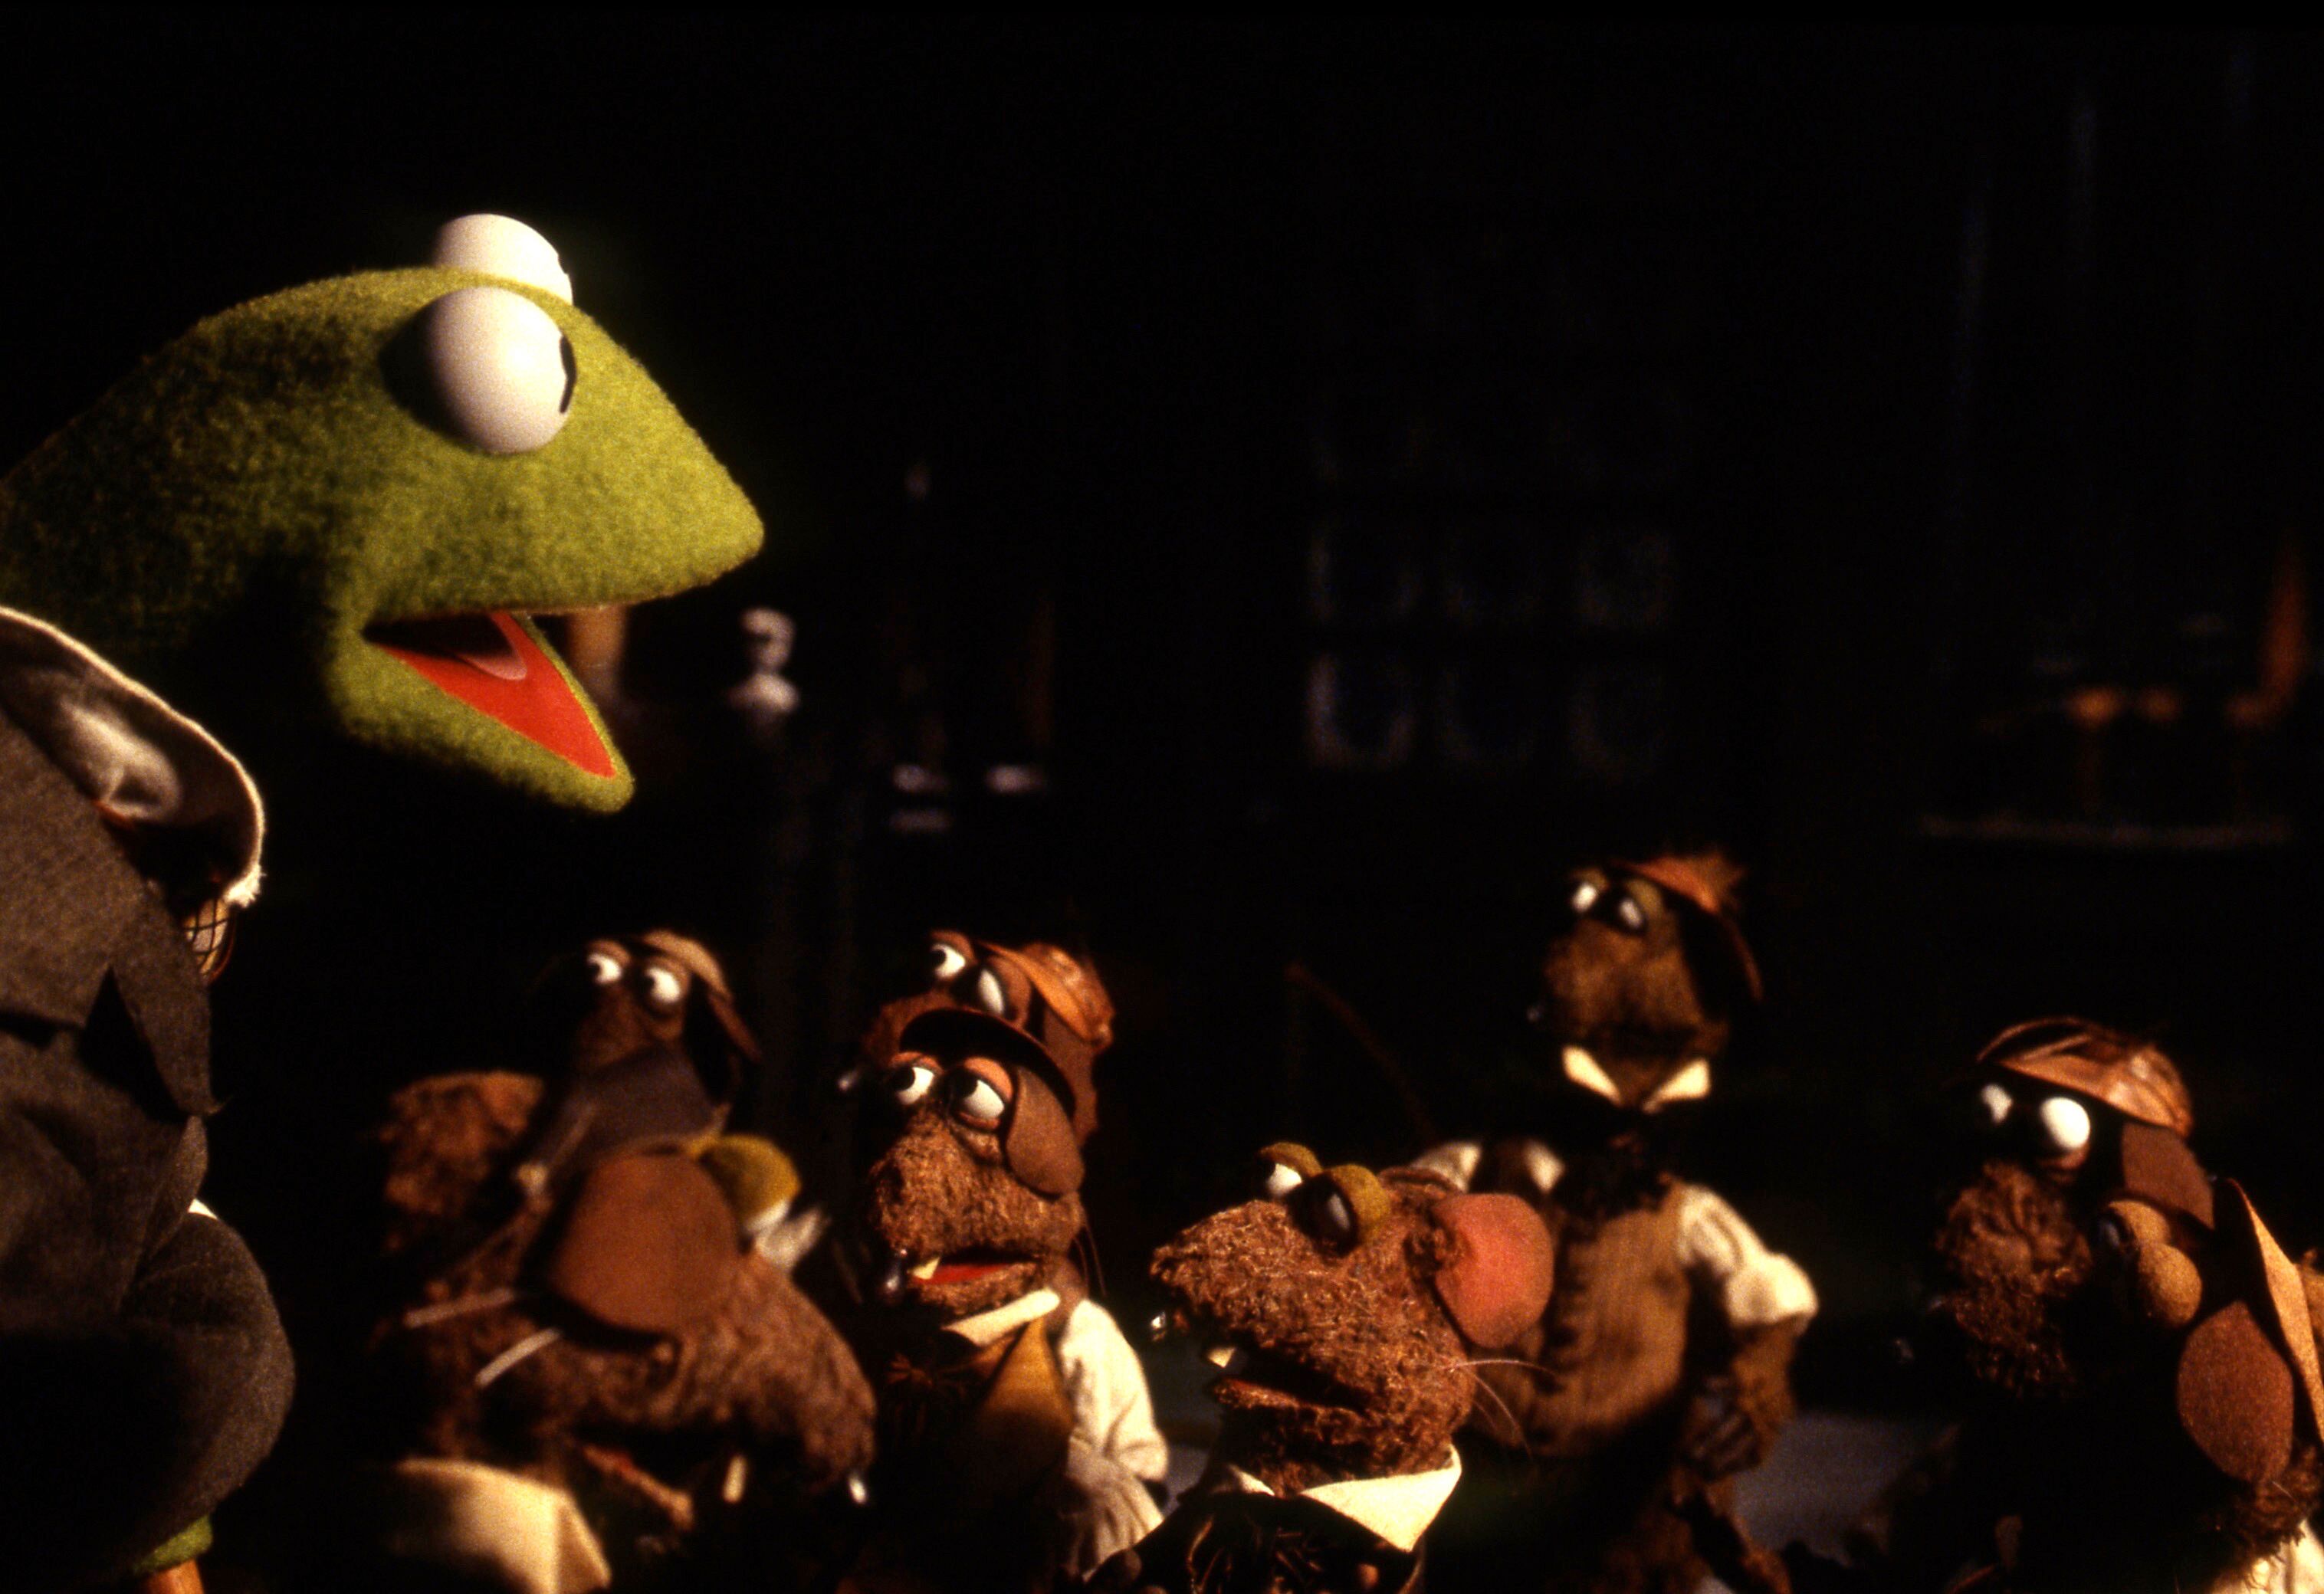 Kermit, a frog talks to rats dressed as Victorian children.